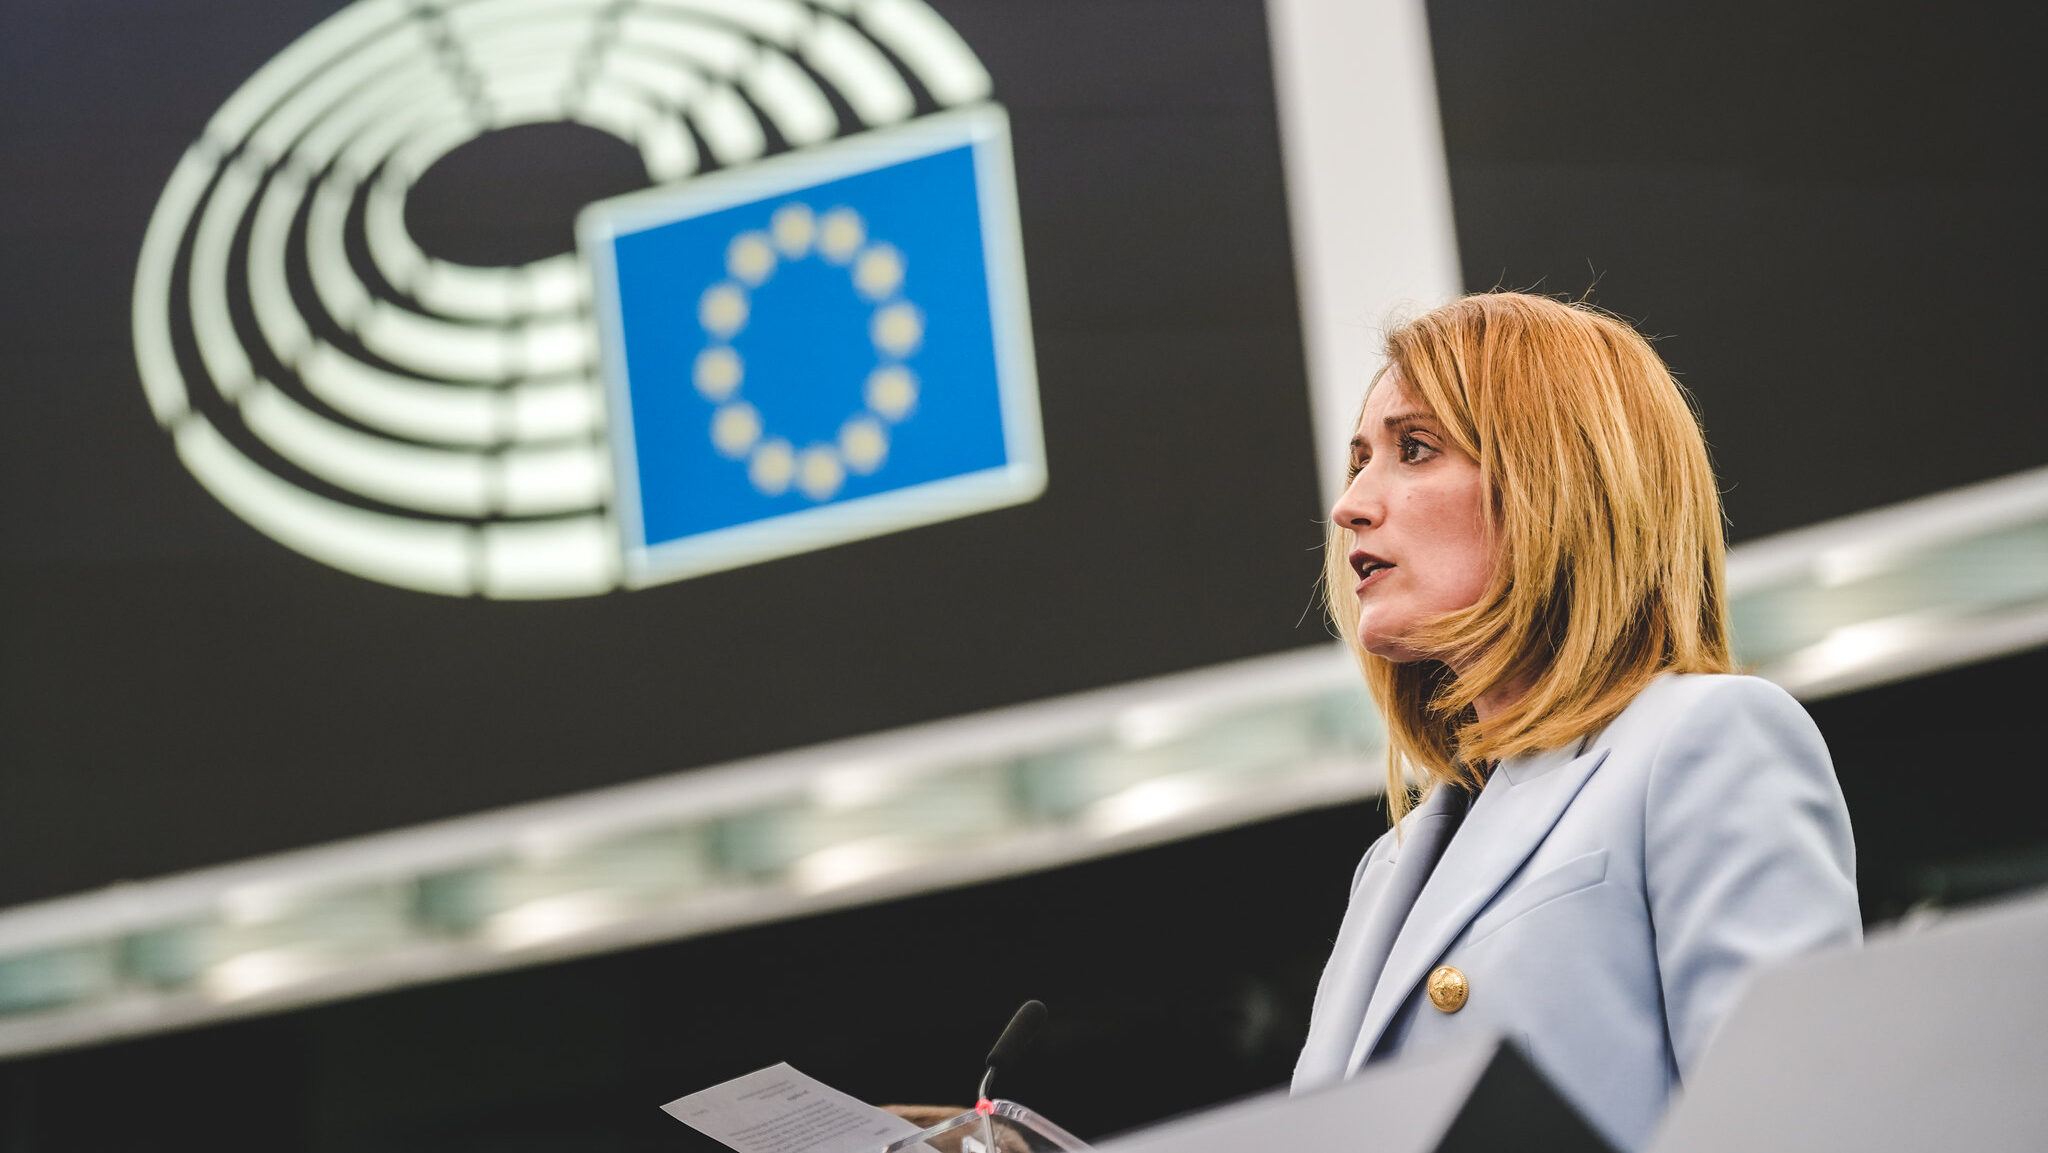 President Metsola led MEPs in a minute of silence in memory of the lives lost in the Tempe Valley train crash in Greece, at the opening of the session in Strasbourg, March 2023.